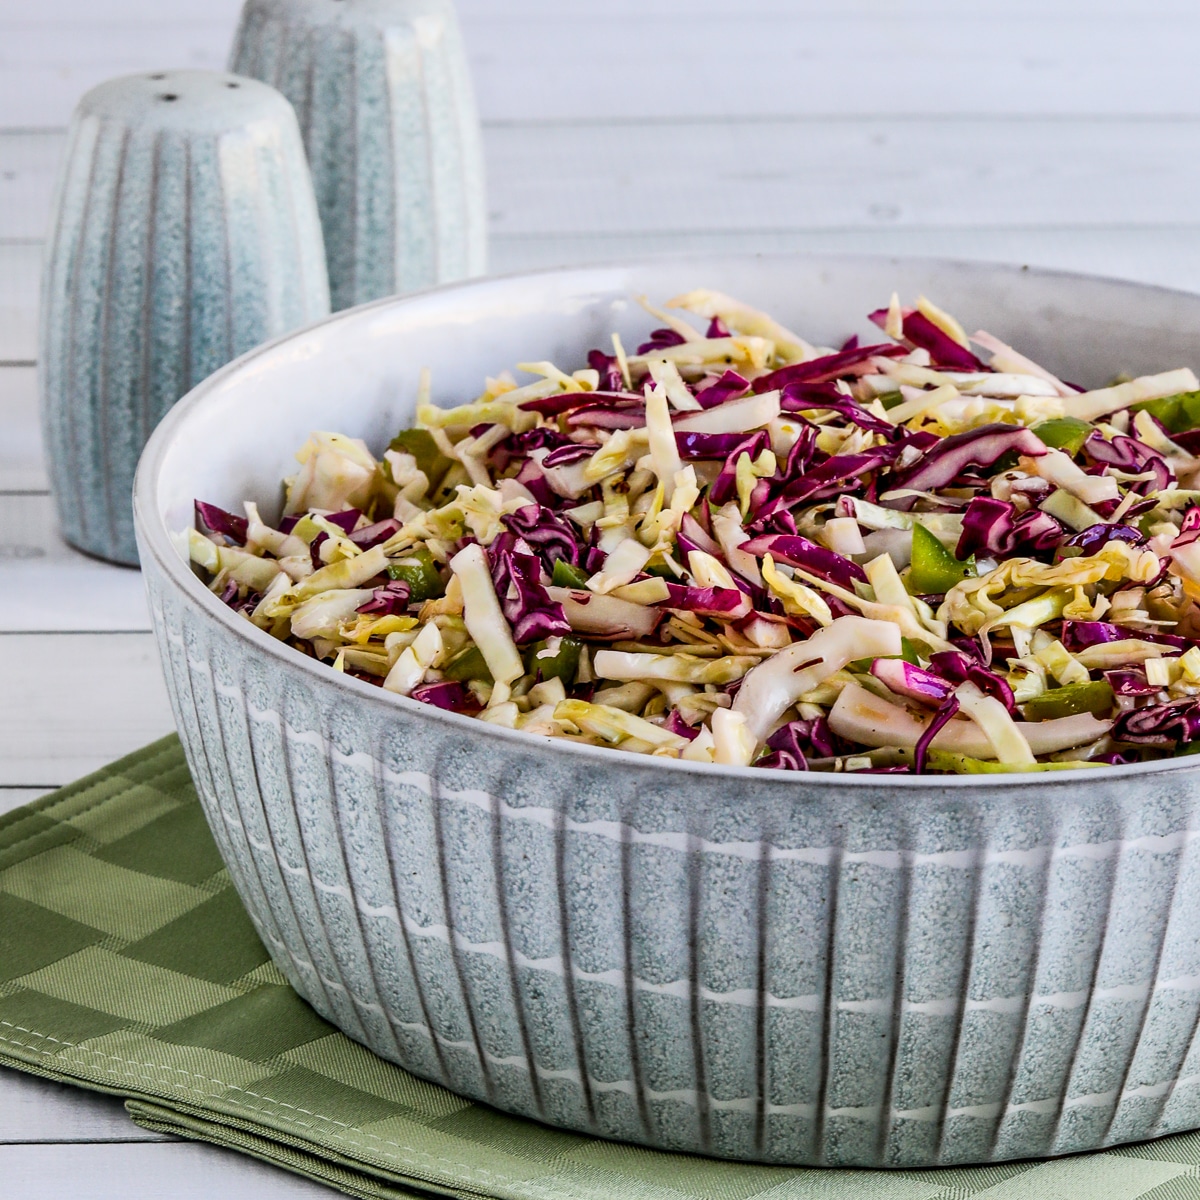 Square image for No-Mayo Vinegar Coleslaw shown in serving bowl.